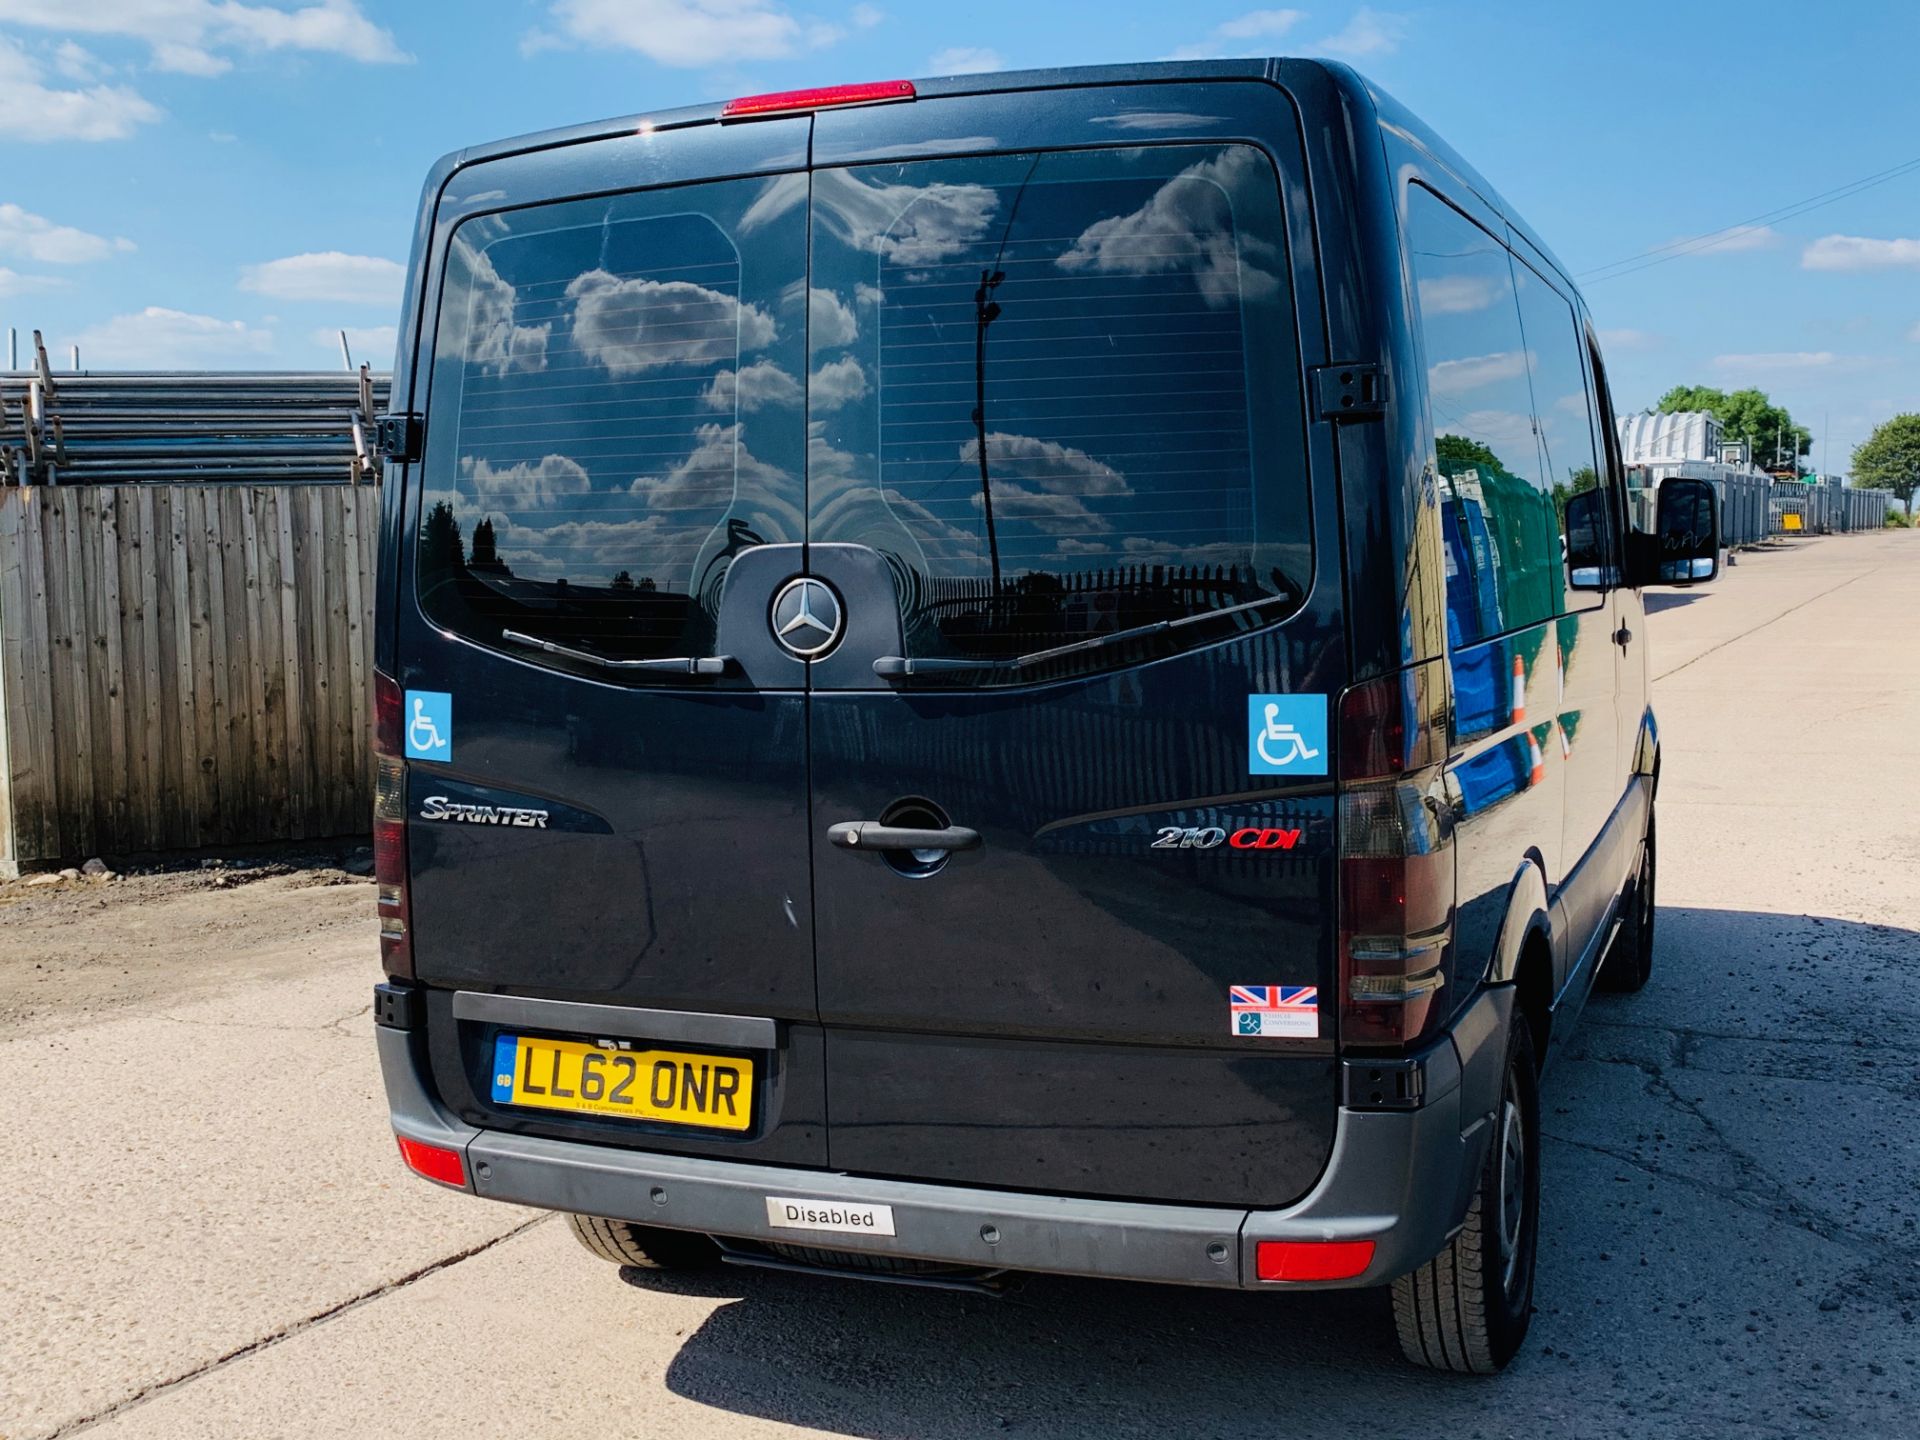 MERCEDES SPRINTER 210CDI DISABLED ACCESS/DRIVER - 62 REG - ONLY 23K MILES -AIR CON - O-H CONVERSION - Image 10 of 33